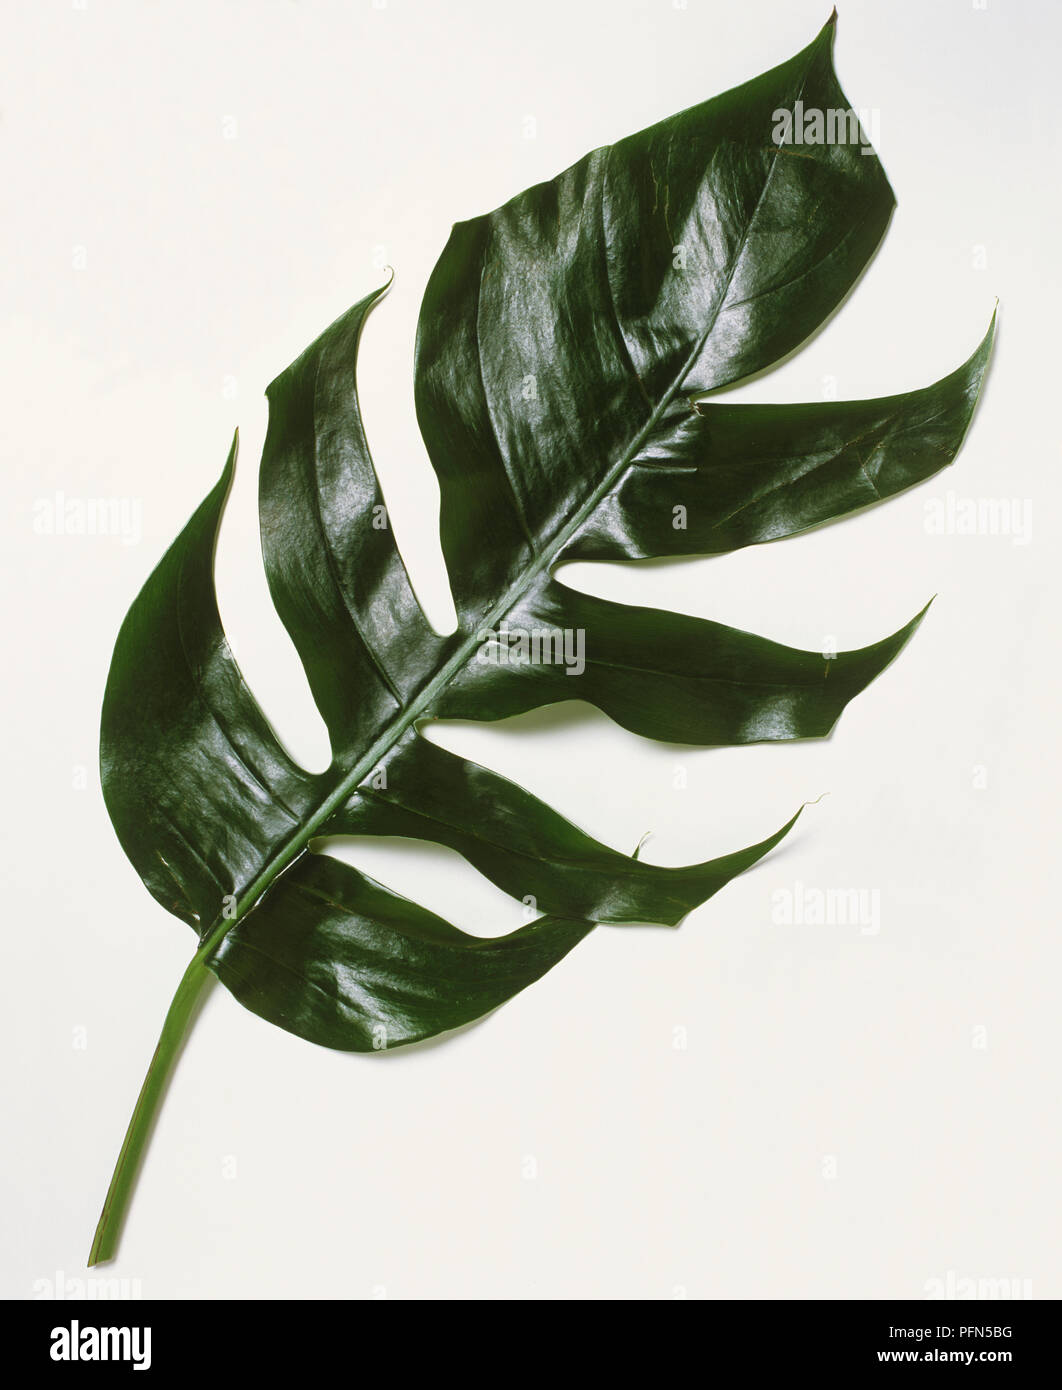 Monstera deliciosa, leaf of Ceriman or Swiss Cheese Plant. Stock Photo